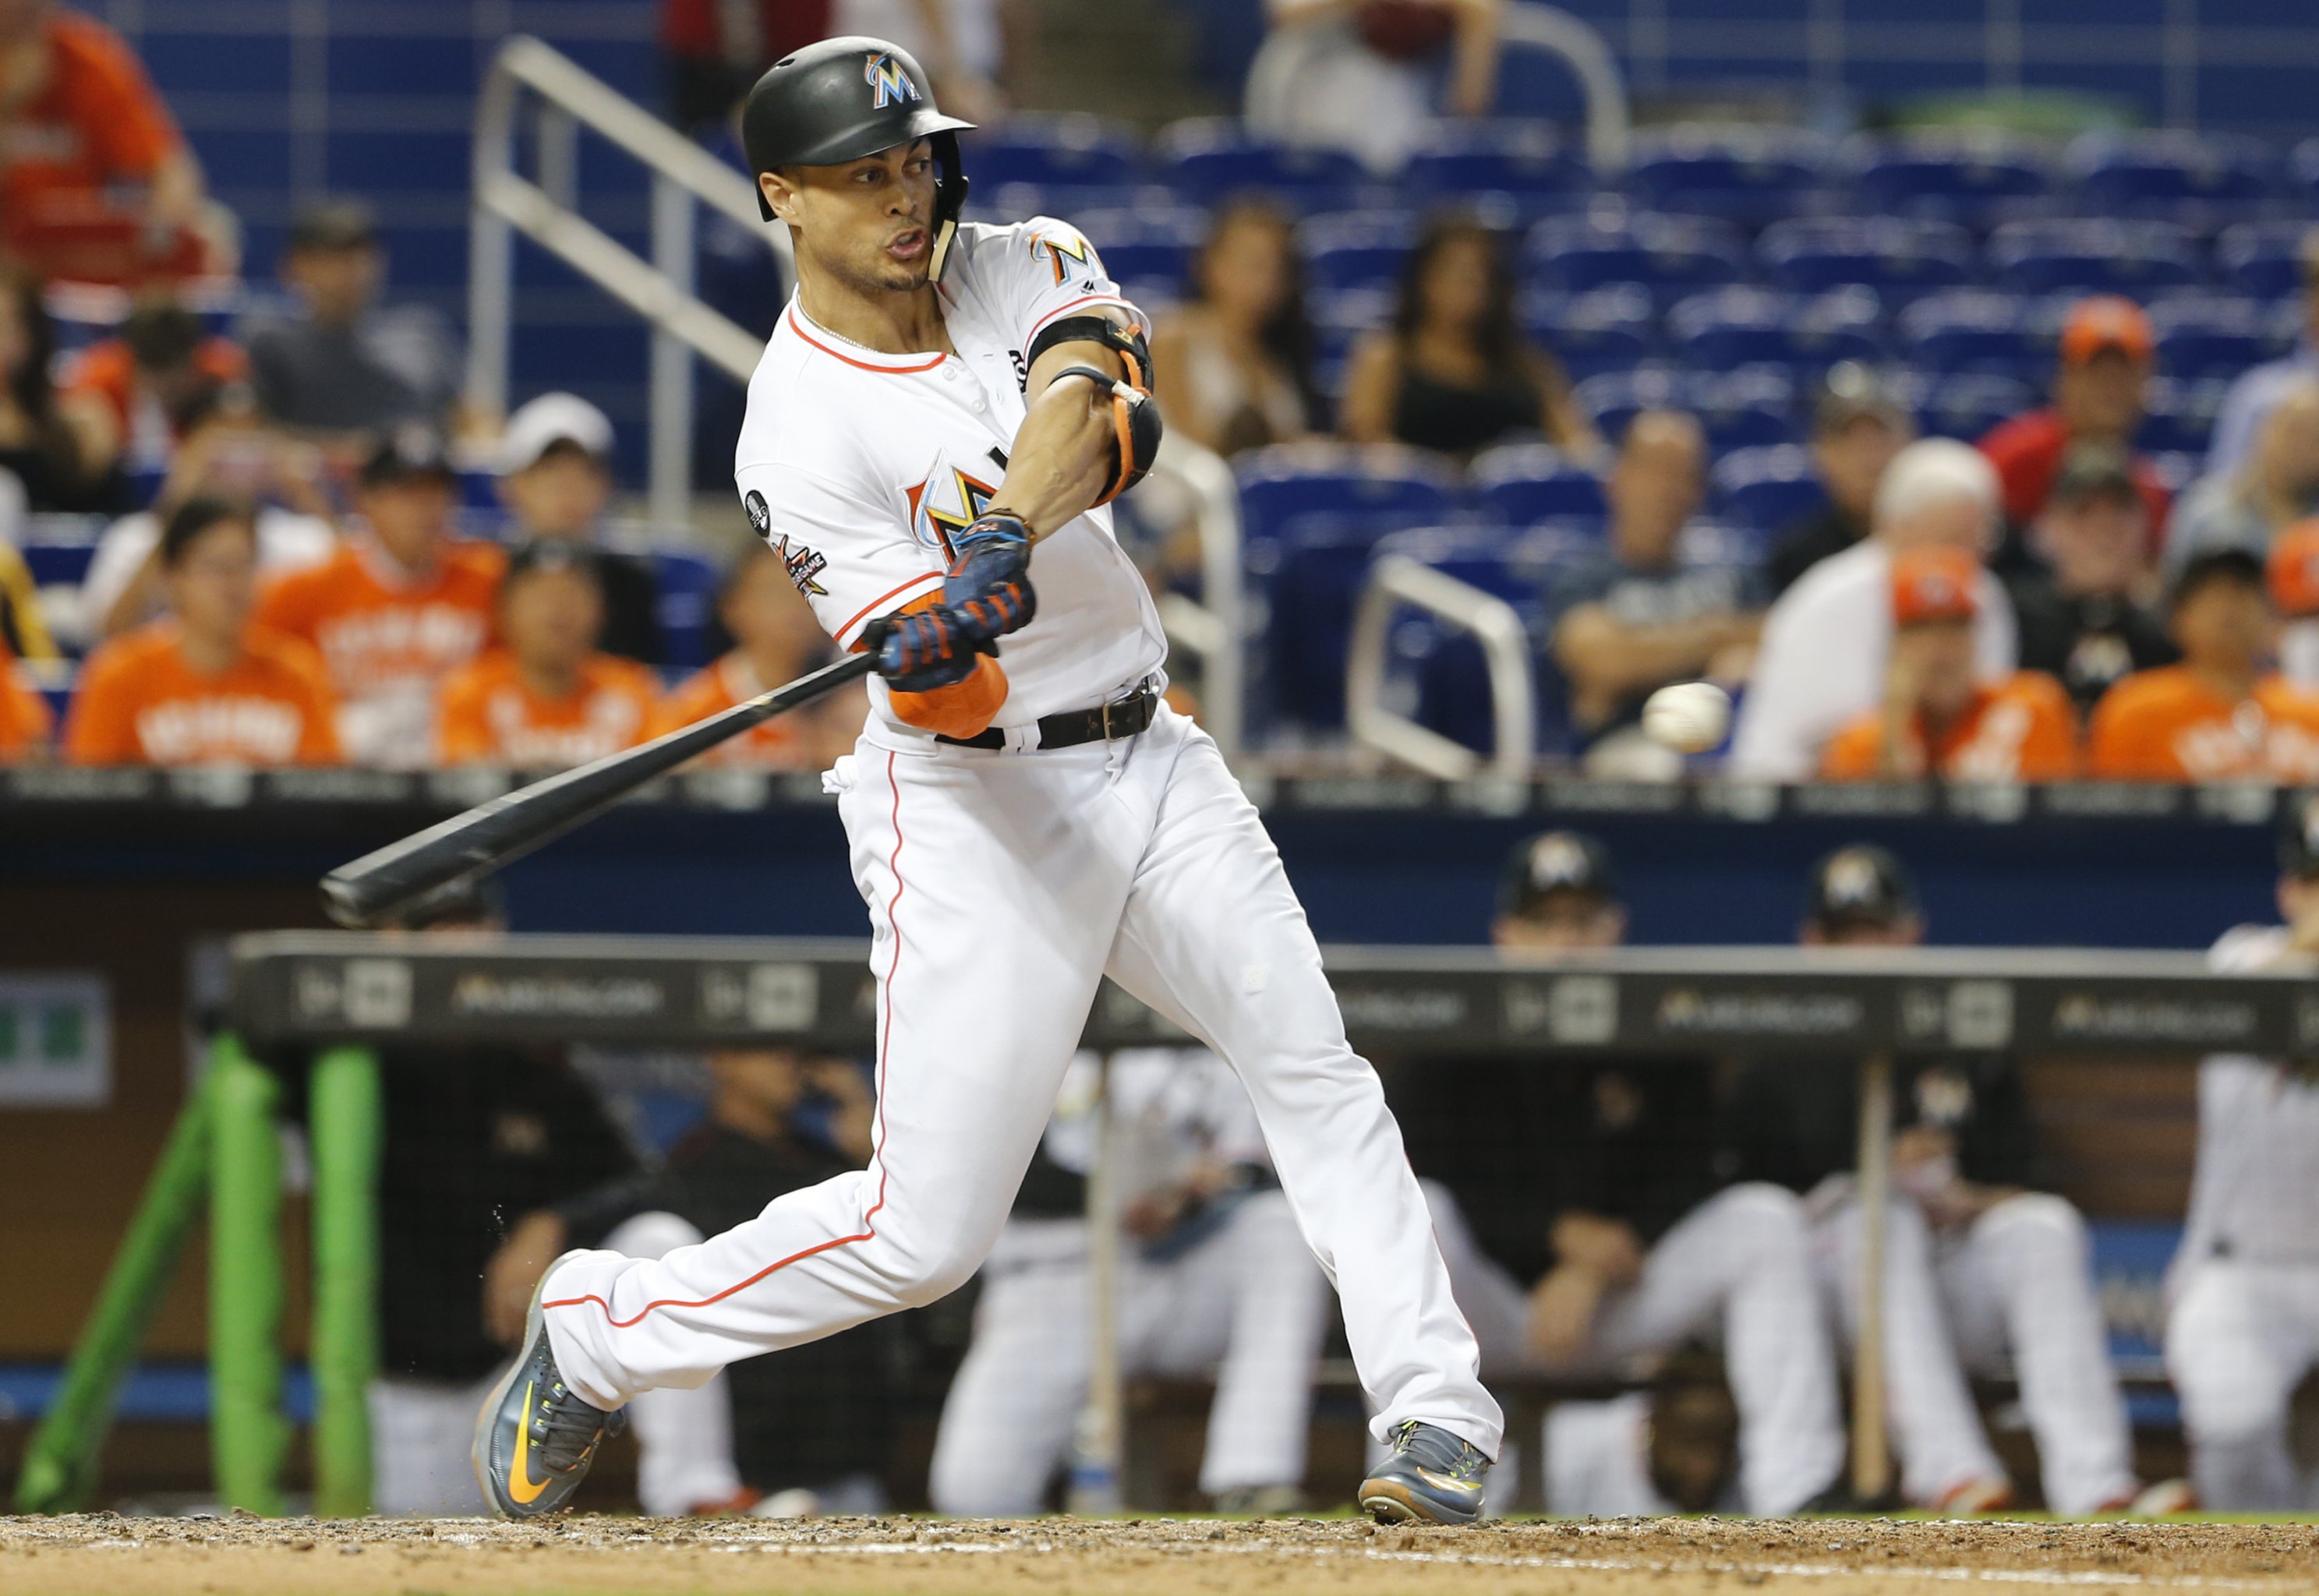 Player of month award offers little solace for Marlins' Giancarlo